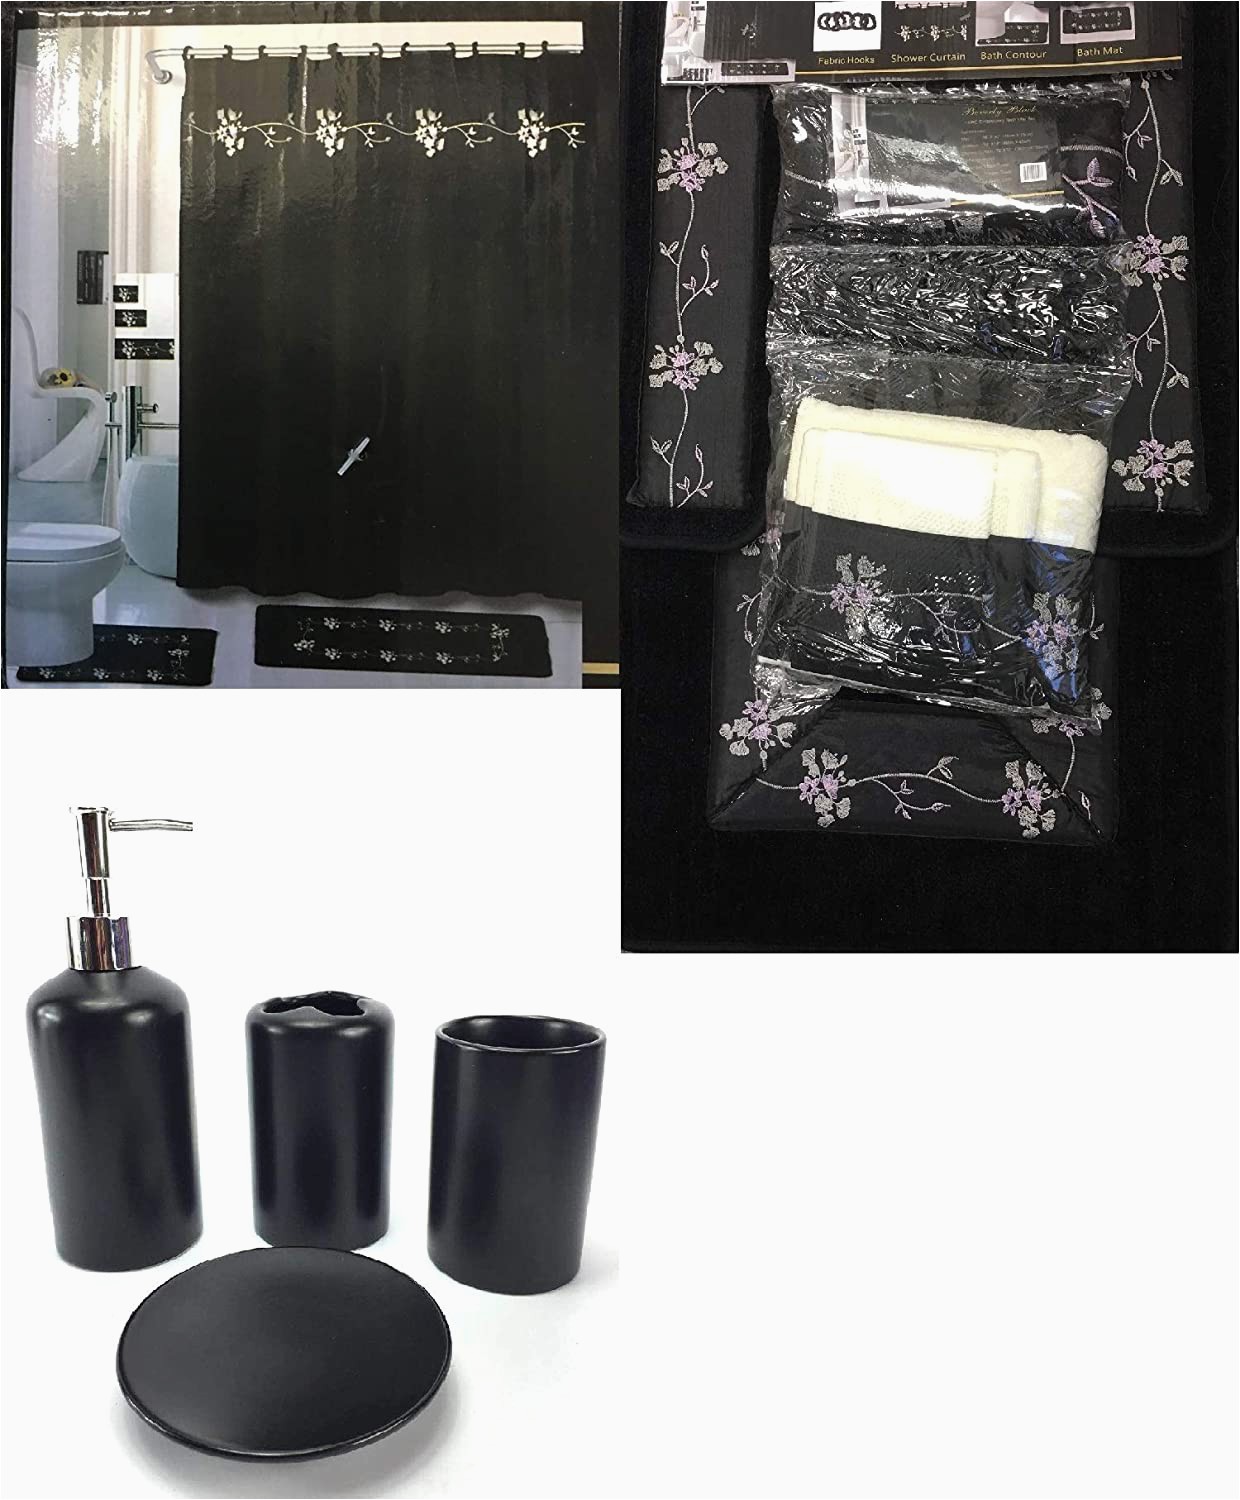 Bath Curtain and Rug Set 22 Piece Bathroom Sets with Shower Curtains Rugs and Accessories Beverly Black